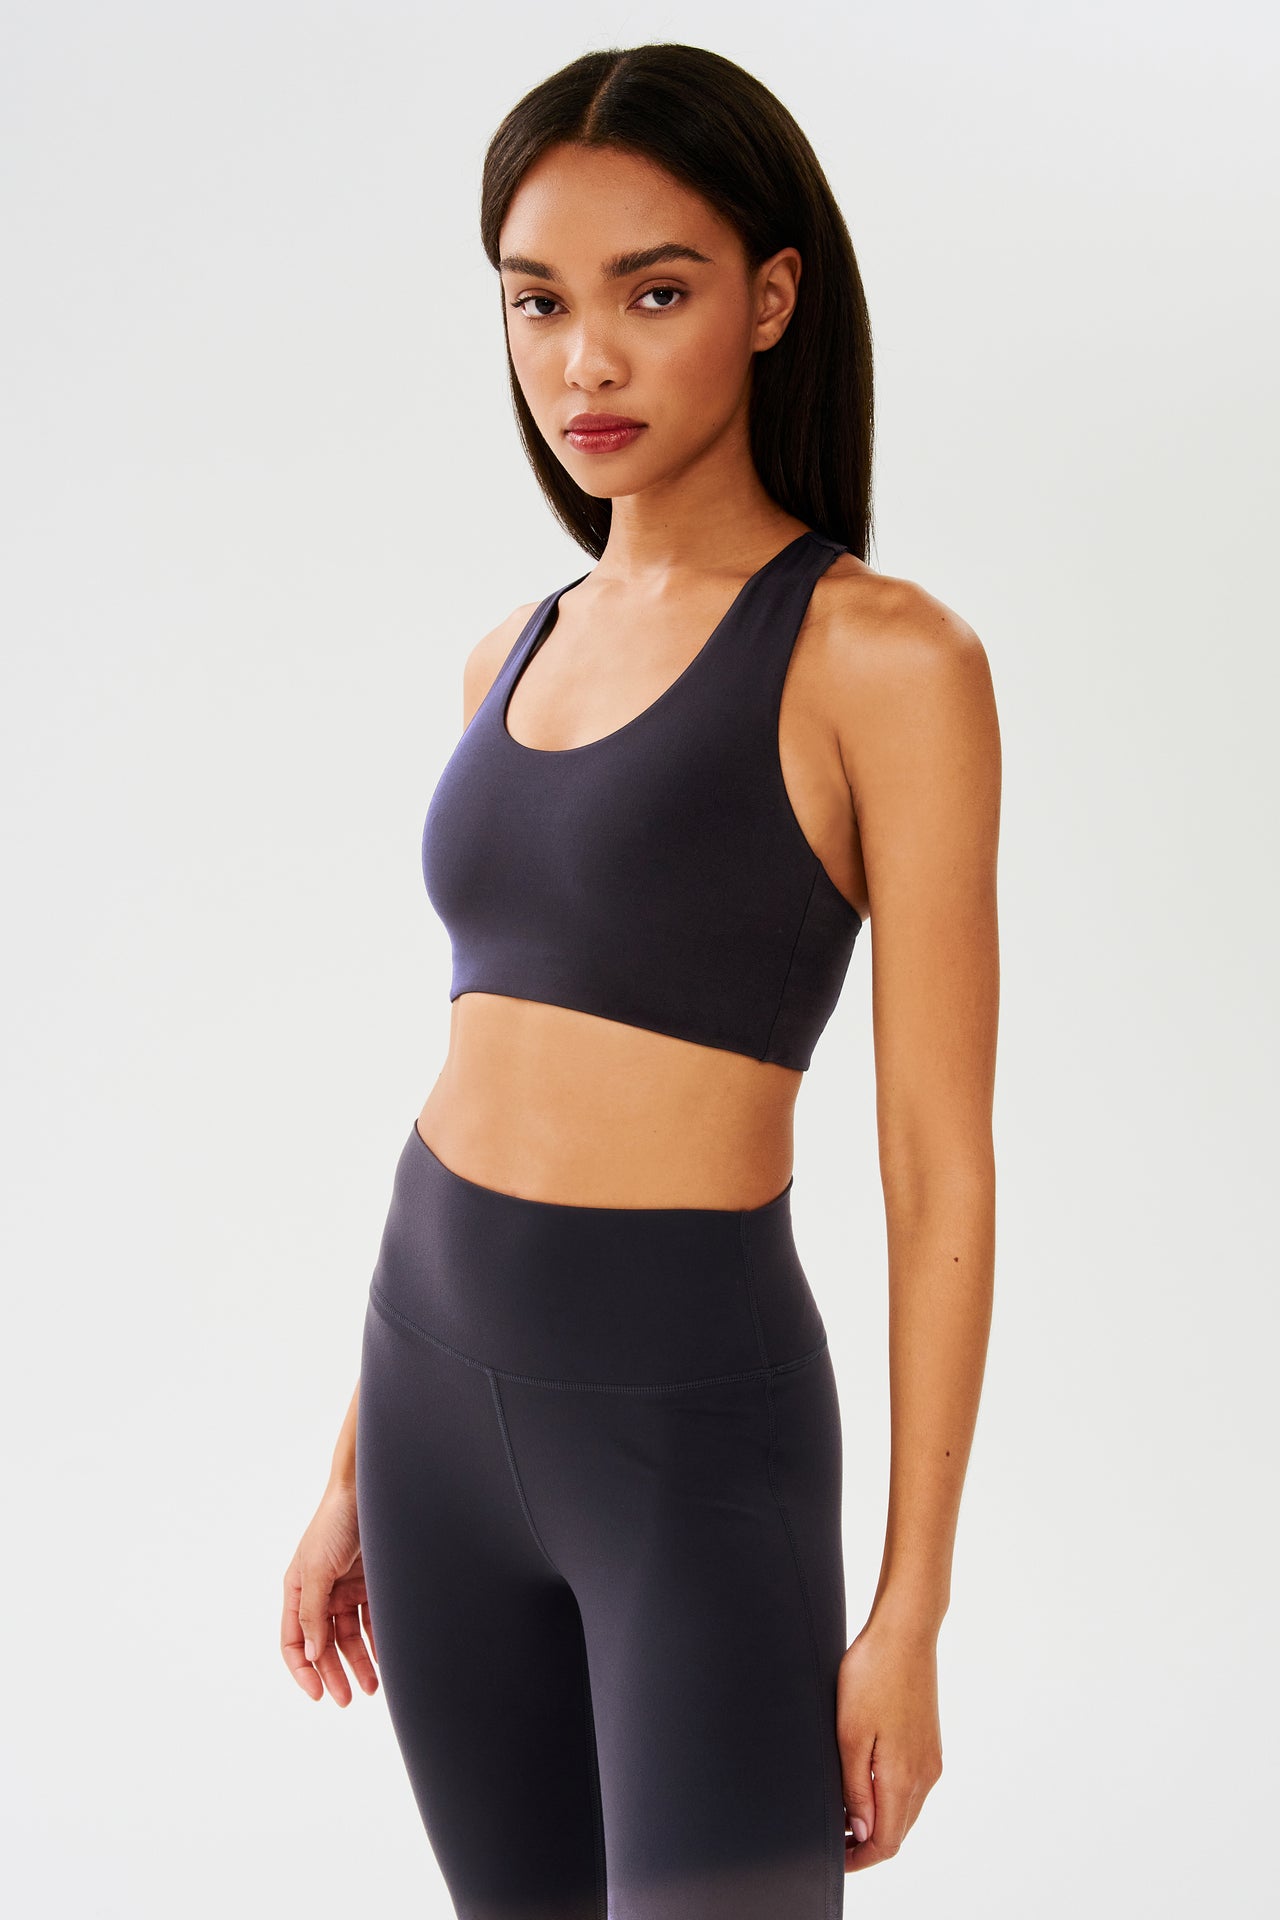 Front side view of woman with straight dark hair wearing dark gray with dark blue tone bra and dark gray with dark blue tone leggings